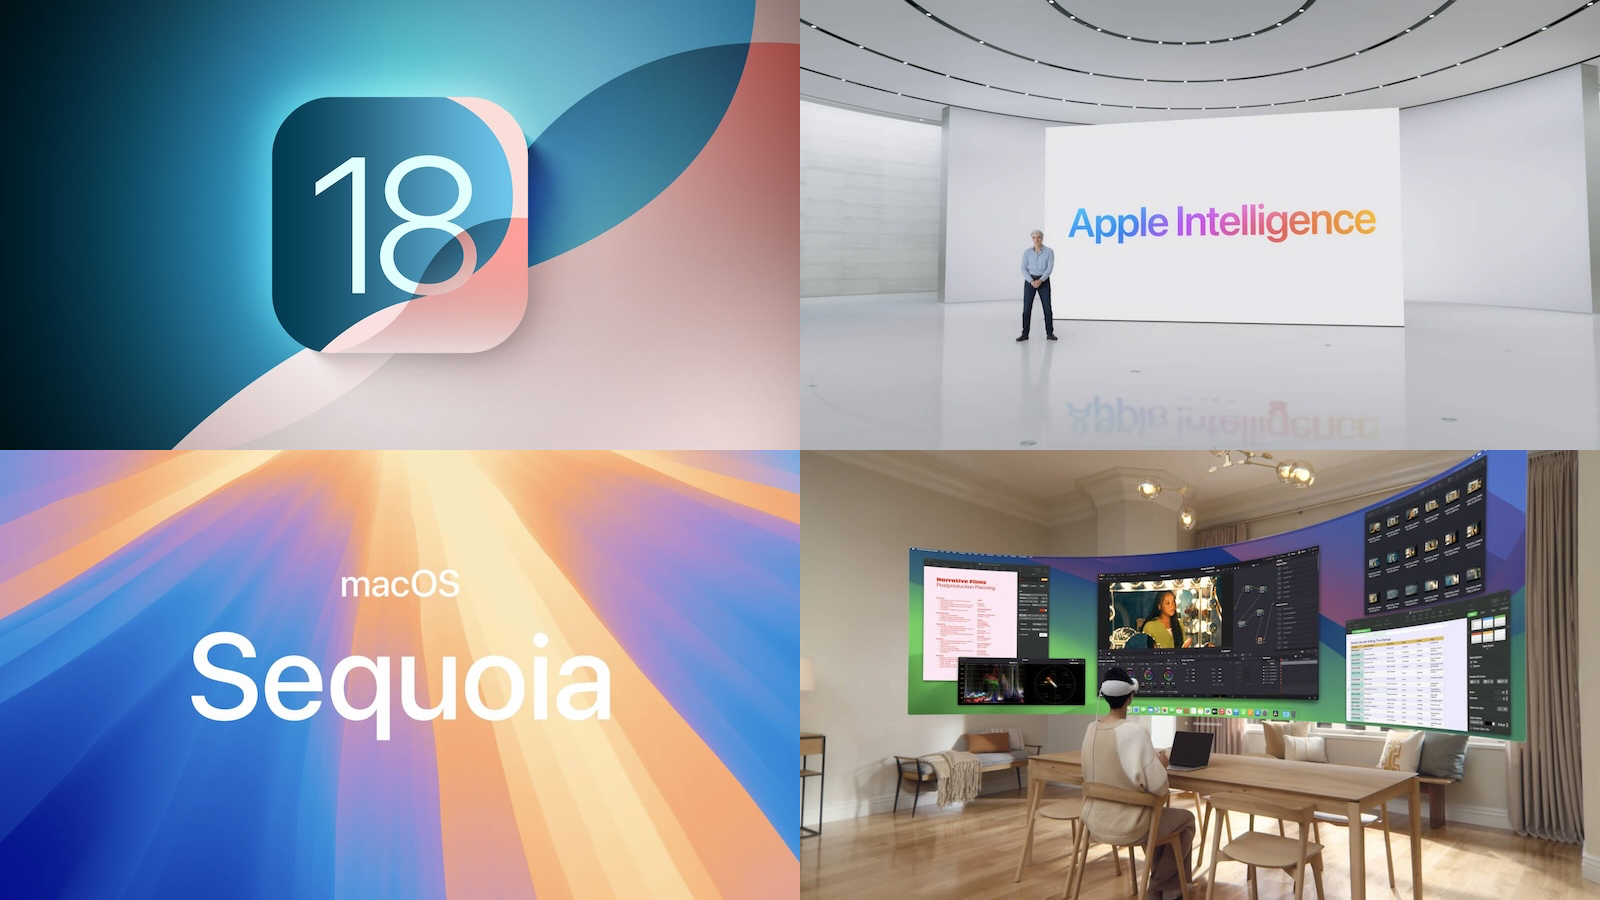 Top Stories WWDC Recap With iOS 18, Apple Intelligence, and More